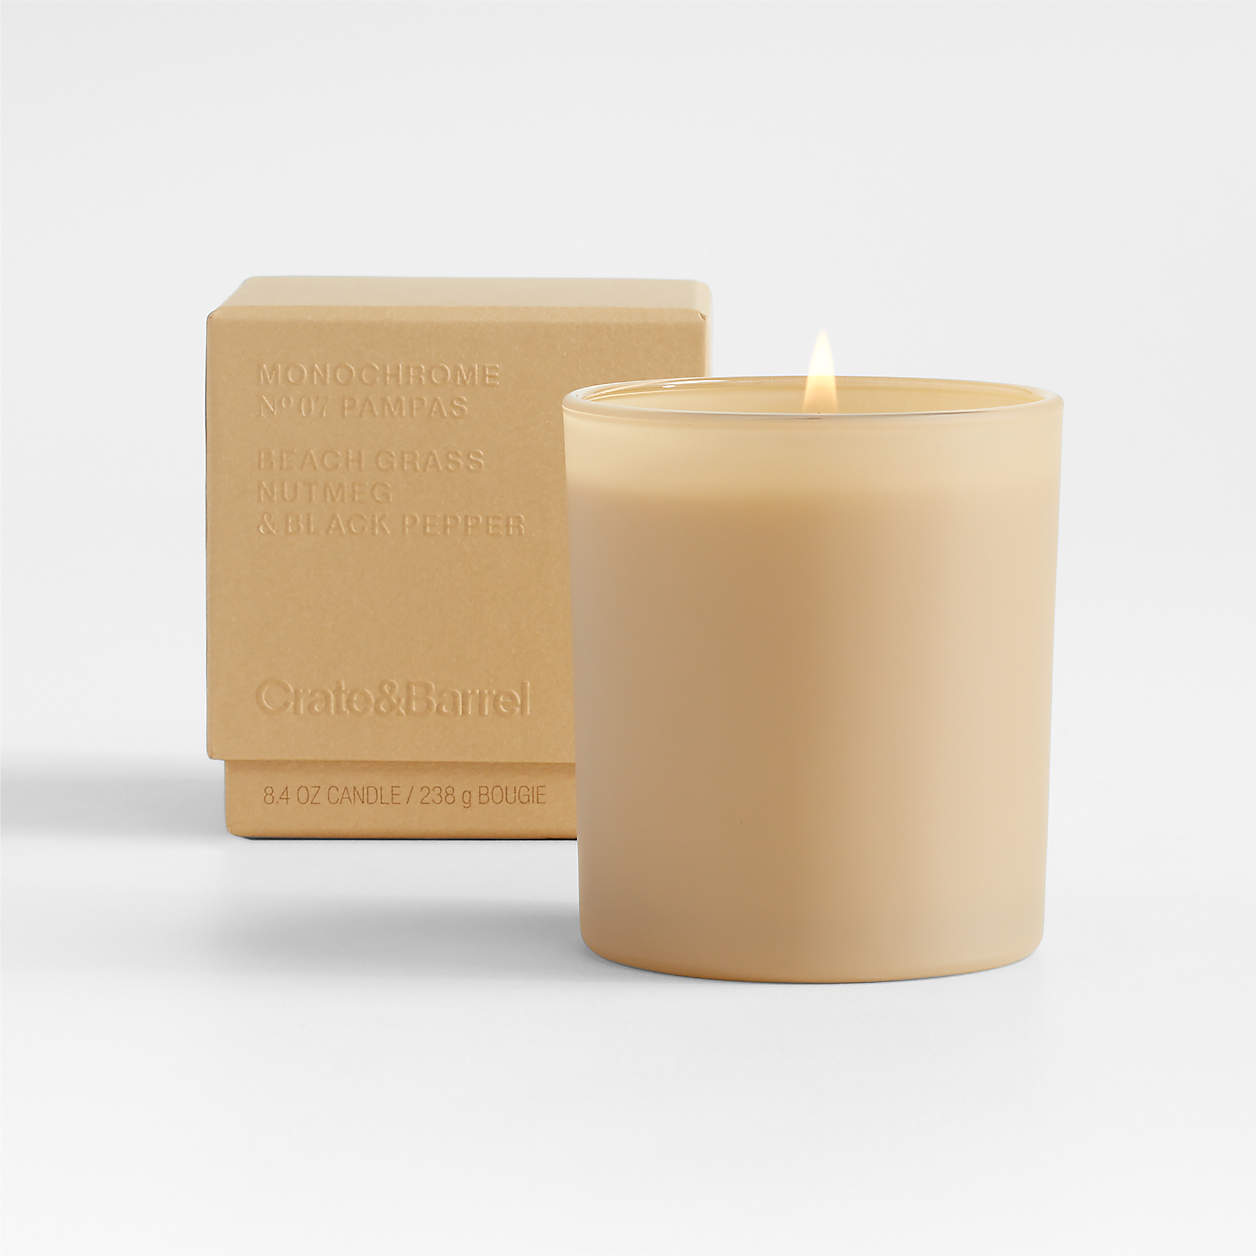 Monochrome No. 7 Pampas 1-Wick Scented Candle - Beach Grass, Nutmeg and ...